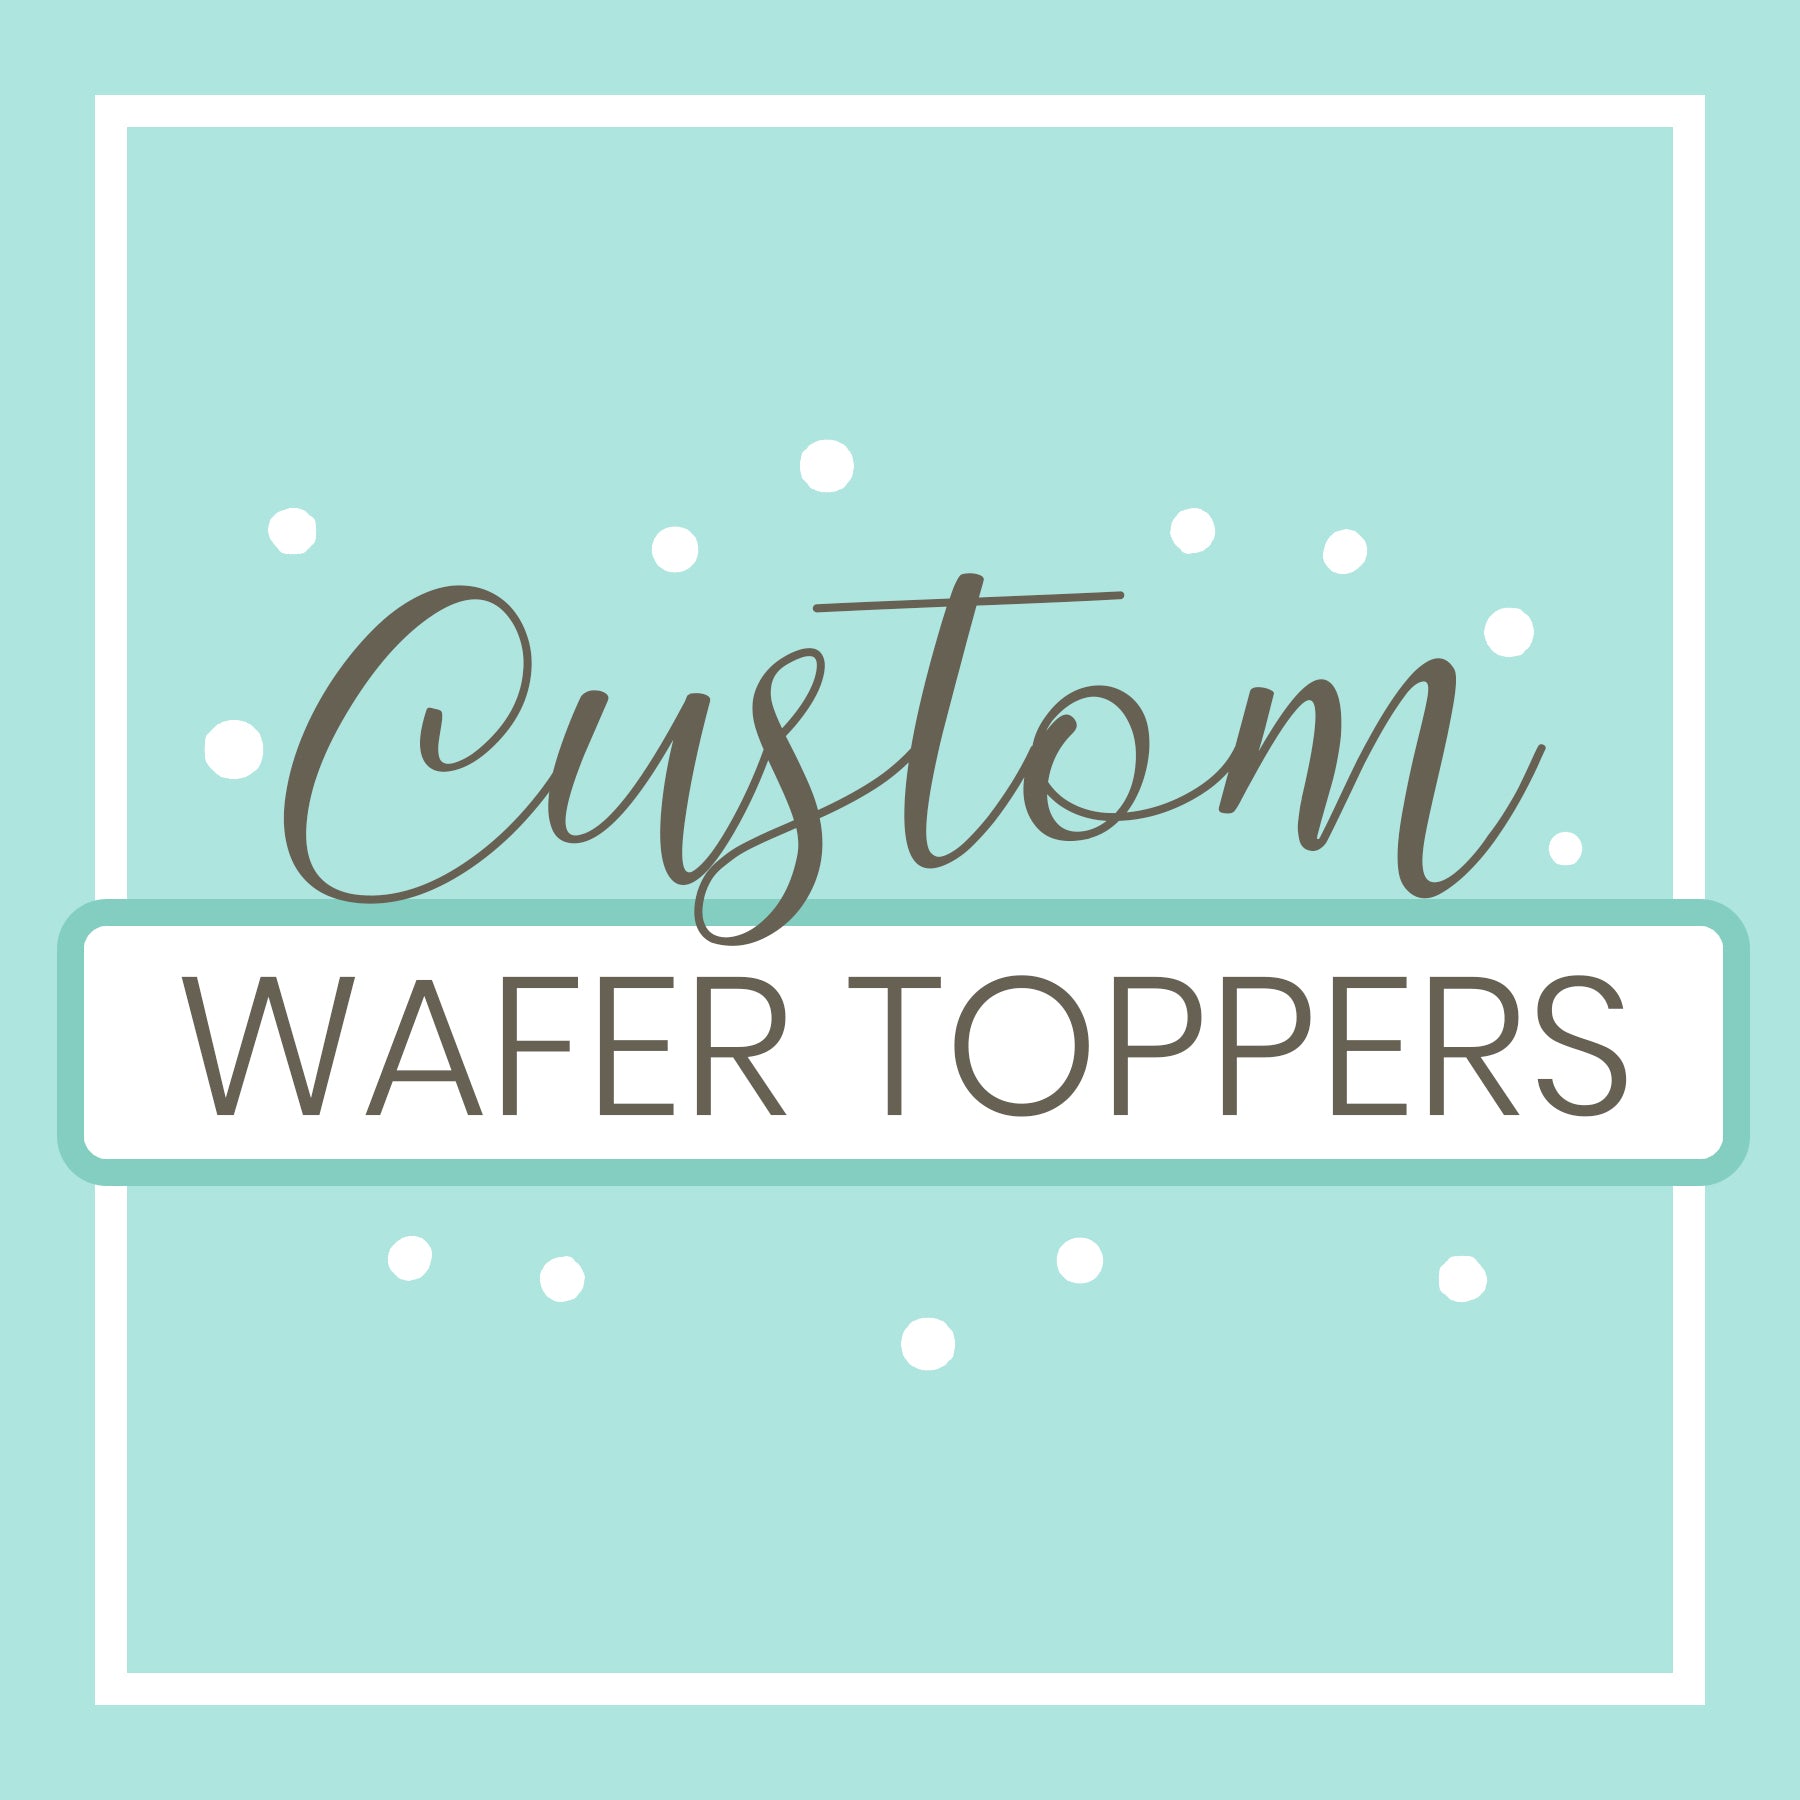 Fondant cupcake toppers, Cupcake cakes, Specialty cake